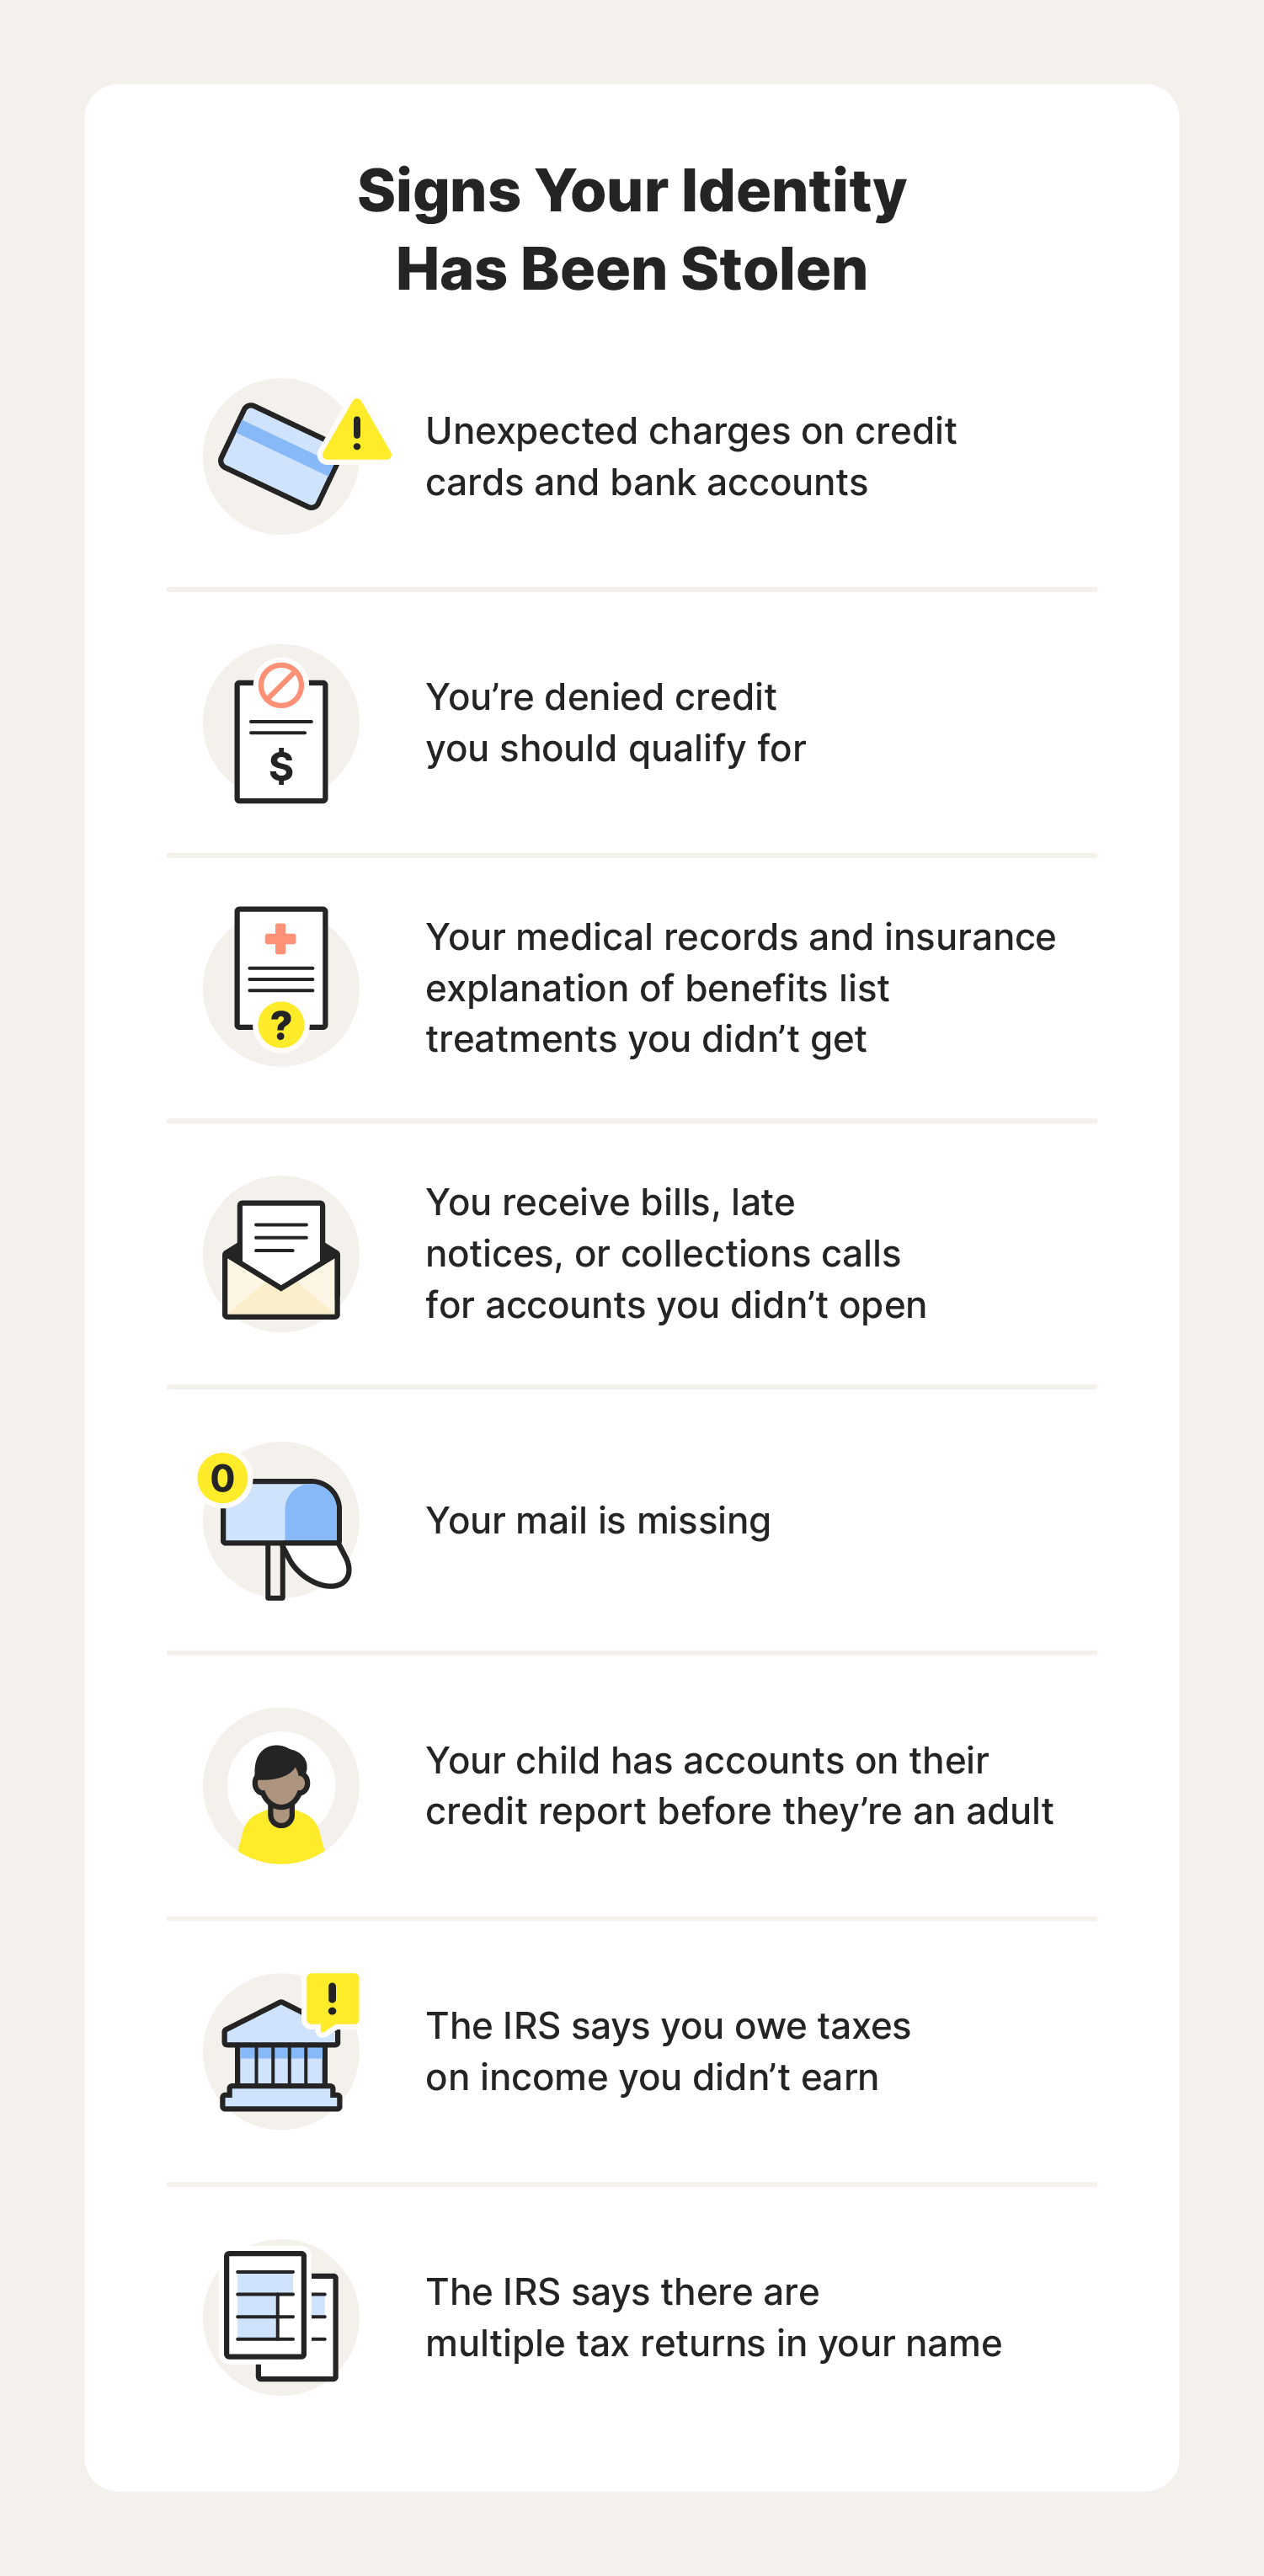 An illustrated chart breaks down some common warning signs of identity theft.